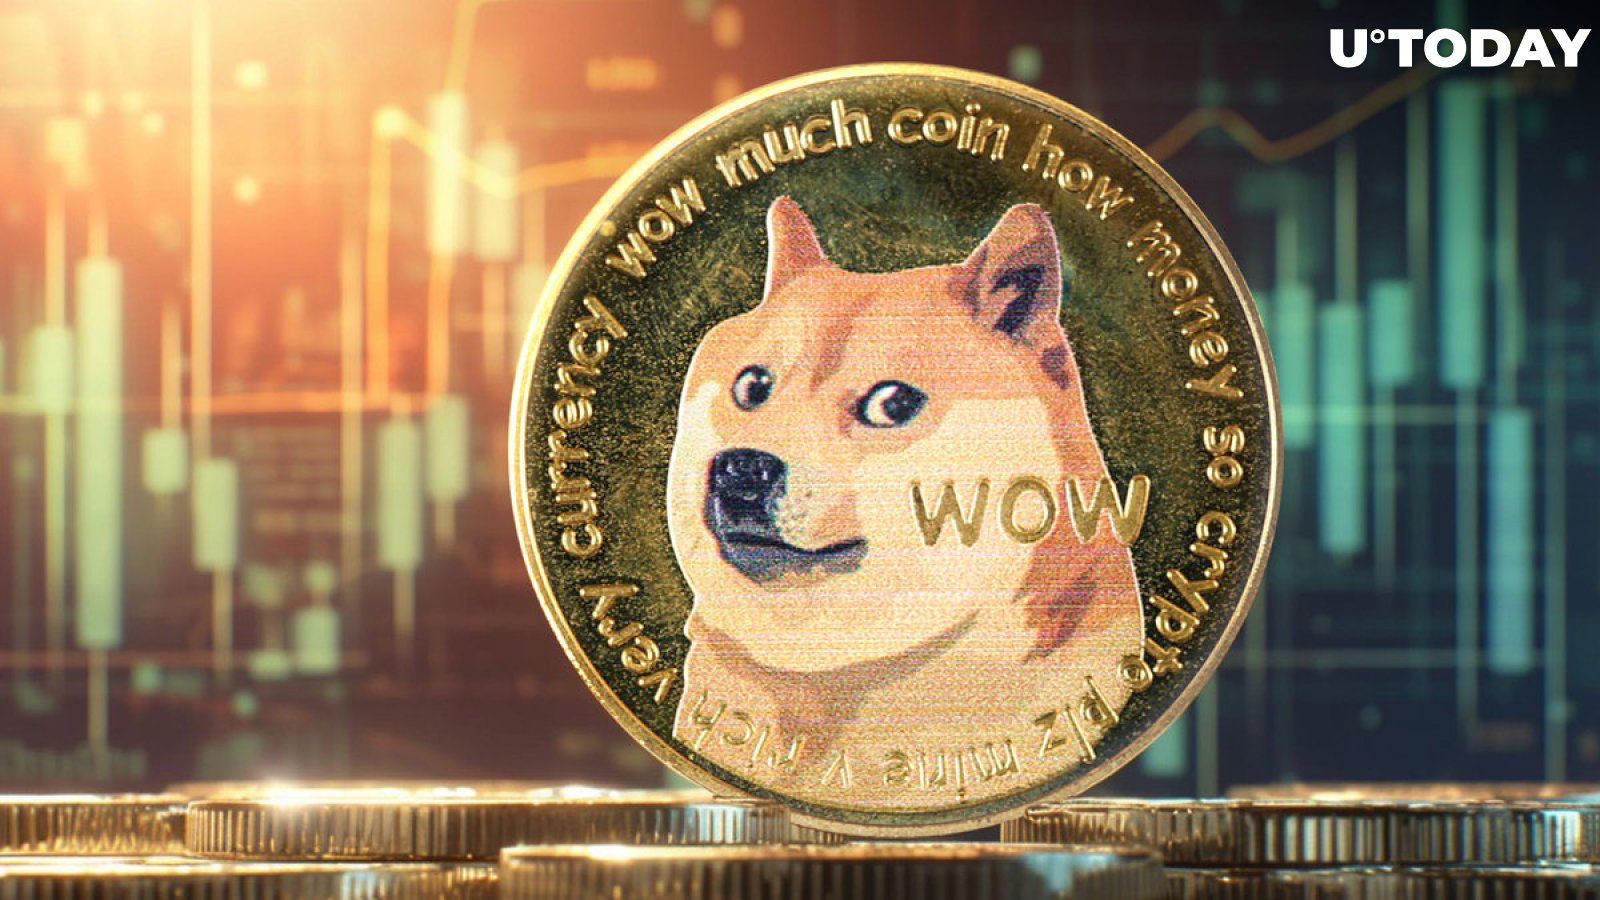 MoonBag Presale Rise To Fame While Avalanche And Dogecoin Face Downfall = The Bit Journal